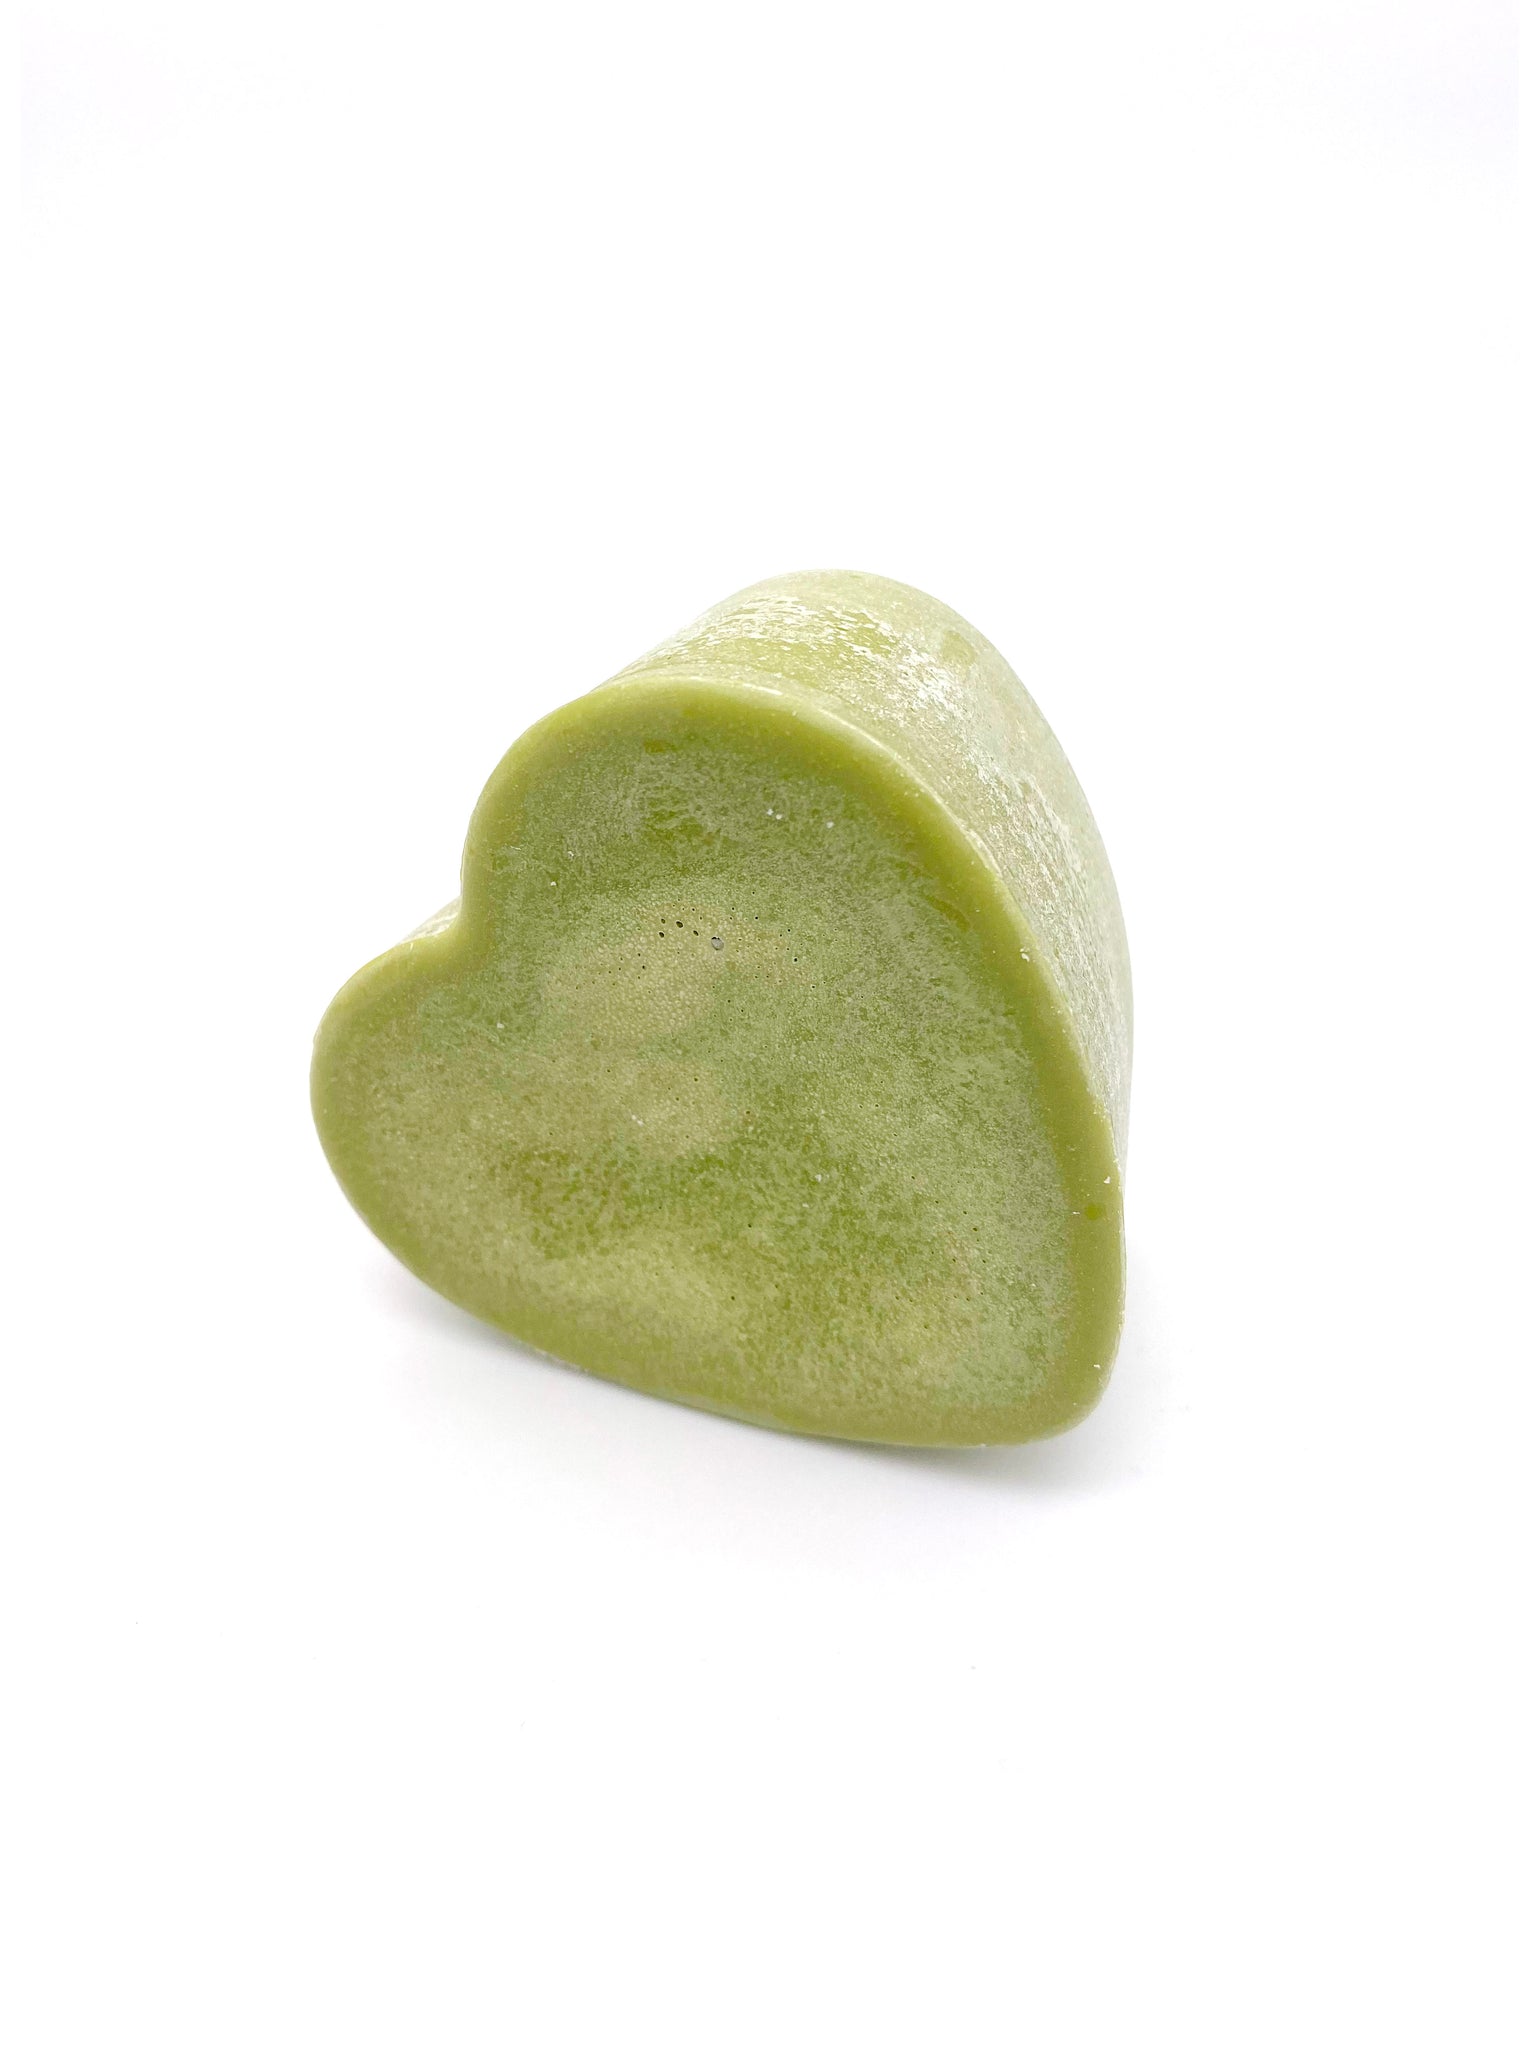 Peppermint Rosemary Conditioner Bar 3oz heart - The Apothecary Fairy